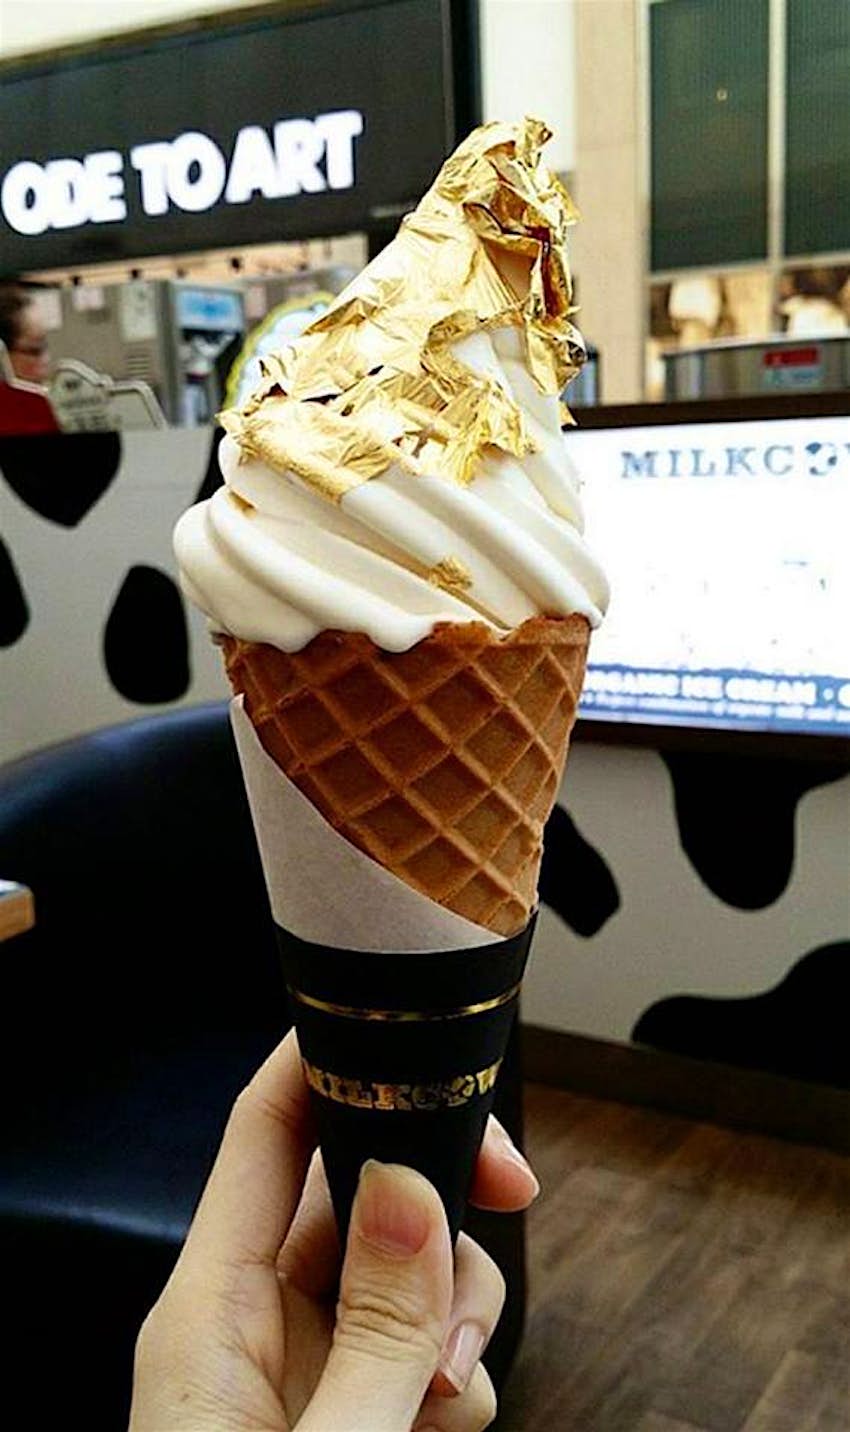 Forget The Flake A Japanese Shop Is Selling An Ice Cream Cone Covered In Real Gold For Just 6 Lonely Planet